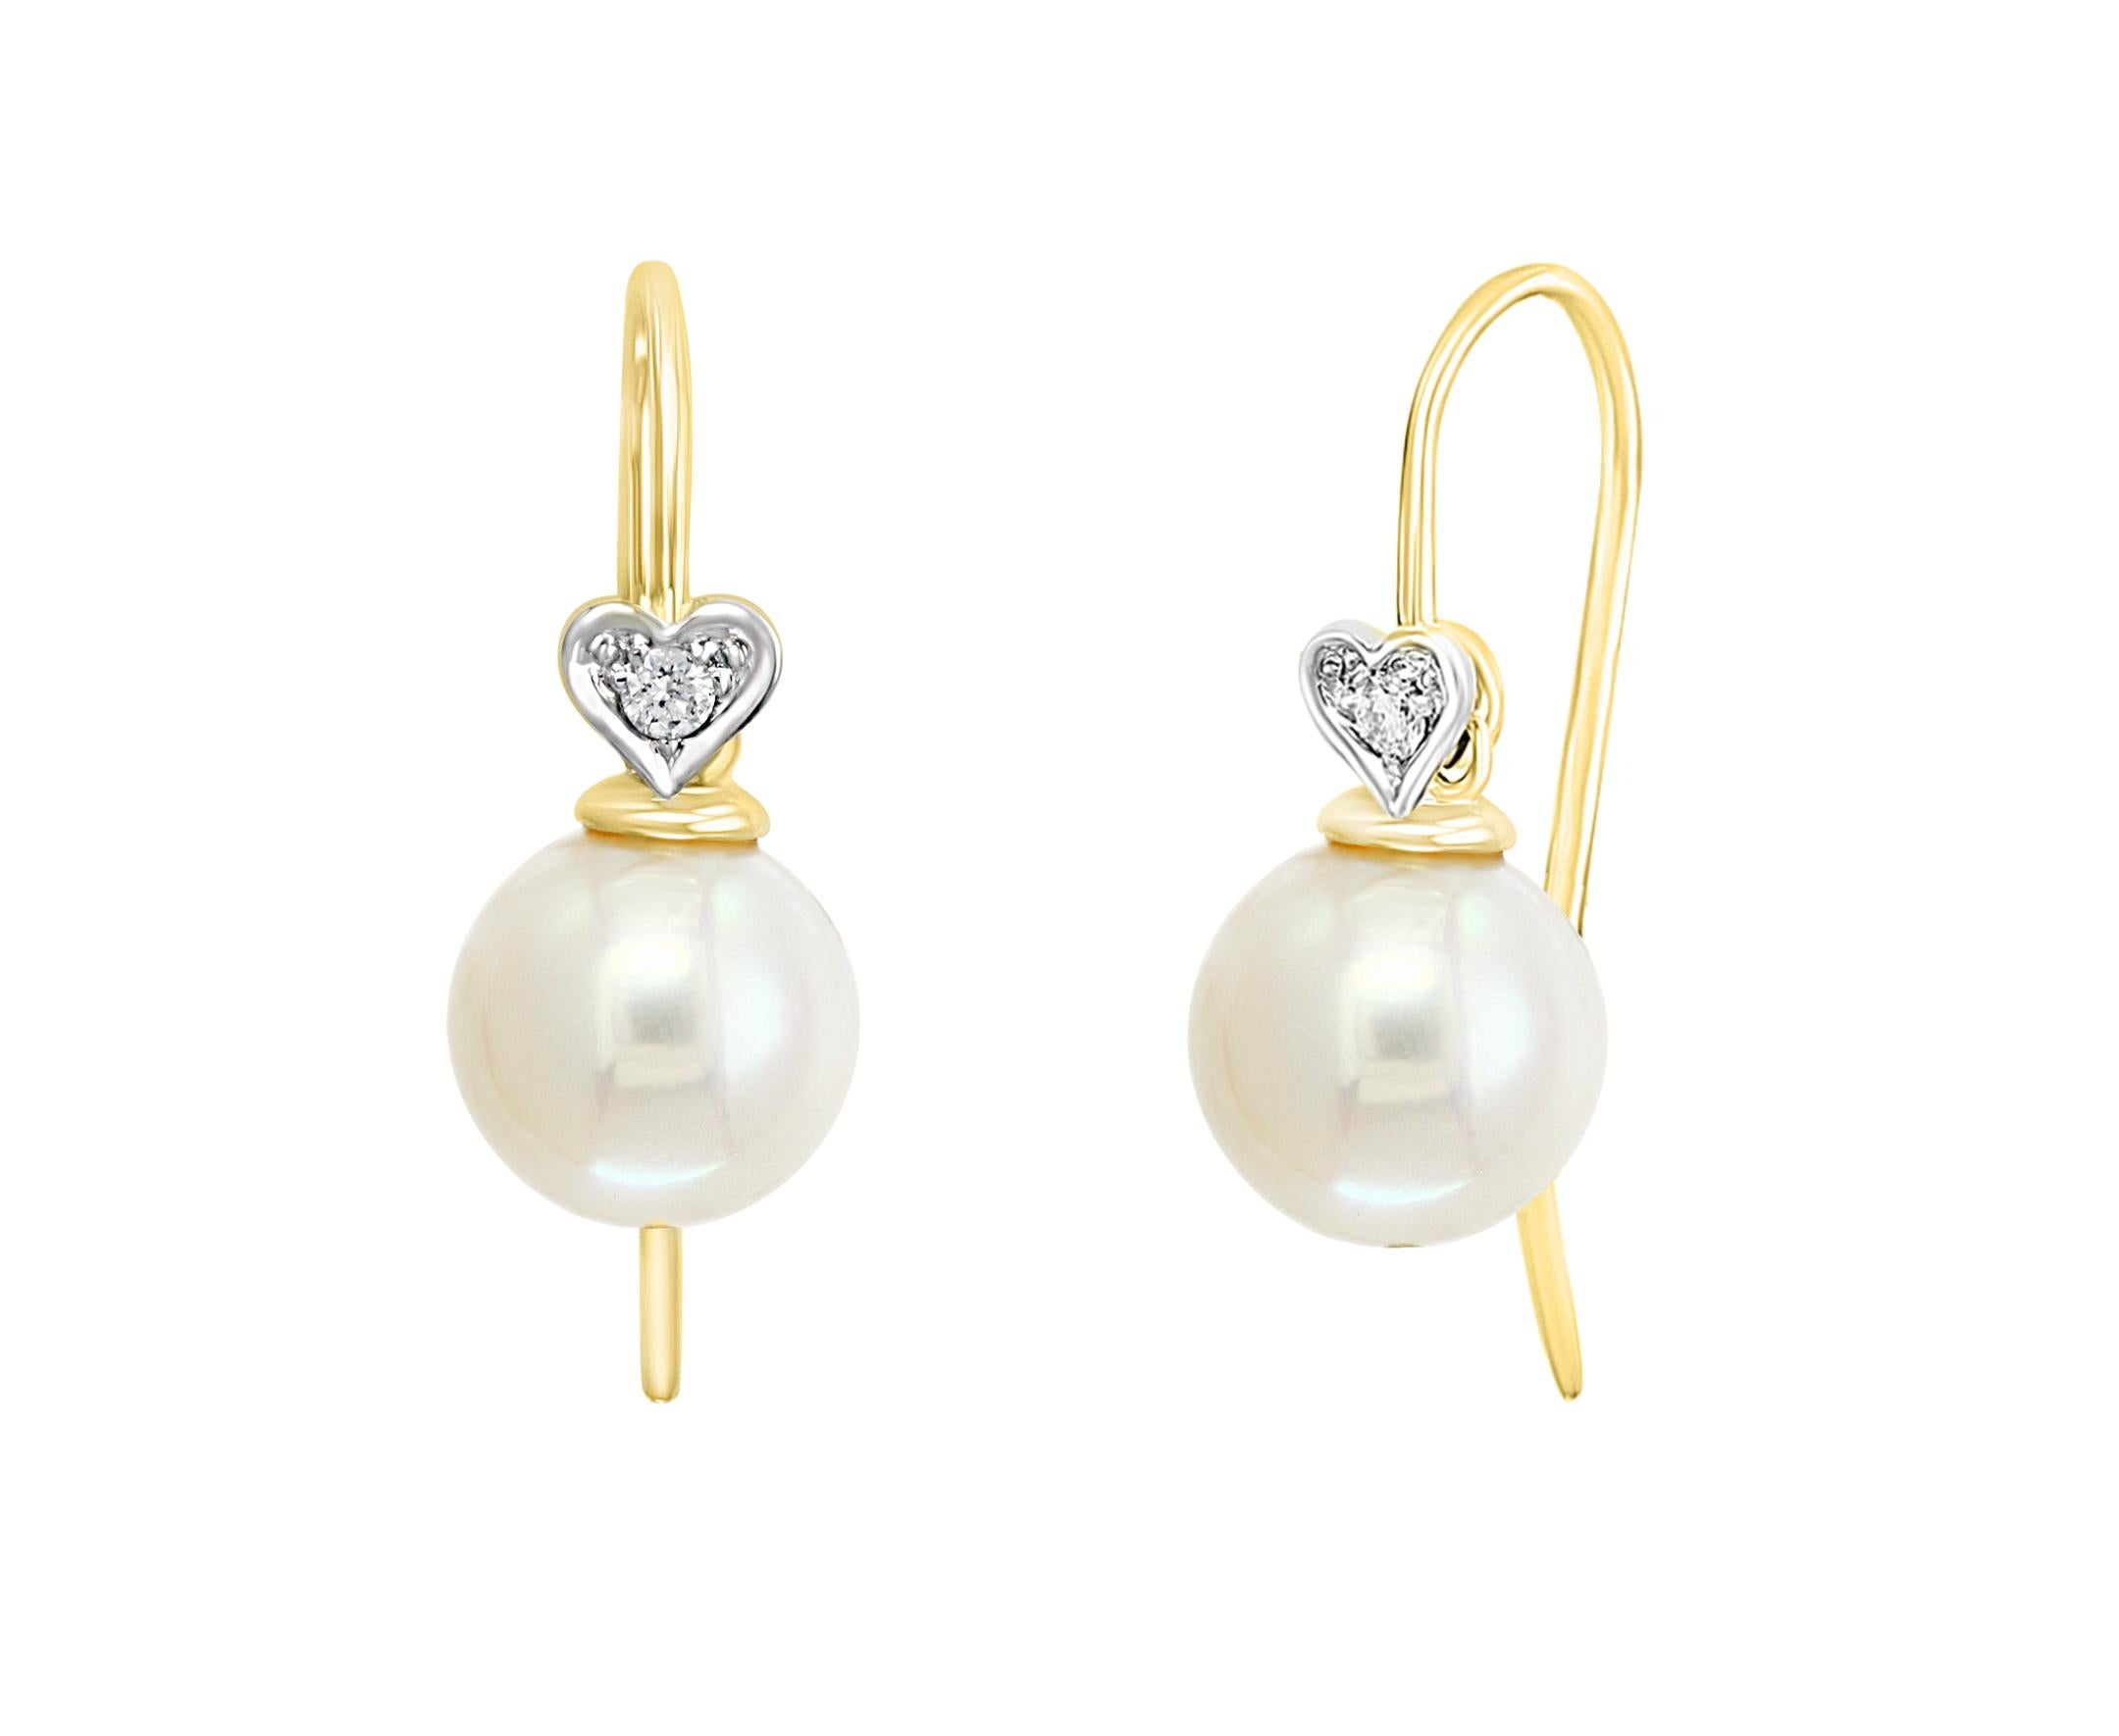 These elegant Diamond and Pearl earrings contain Chinese Freshwater white cultured round pearls measuring 8-8.5mm set on 14K yellow gold and diamond hearts with 0.06 carats of diamonds. Simple, yet elegant, these earrings are a great addition to any